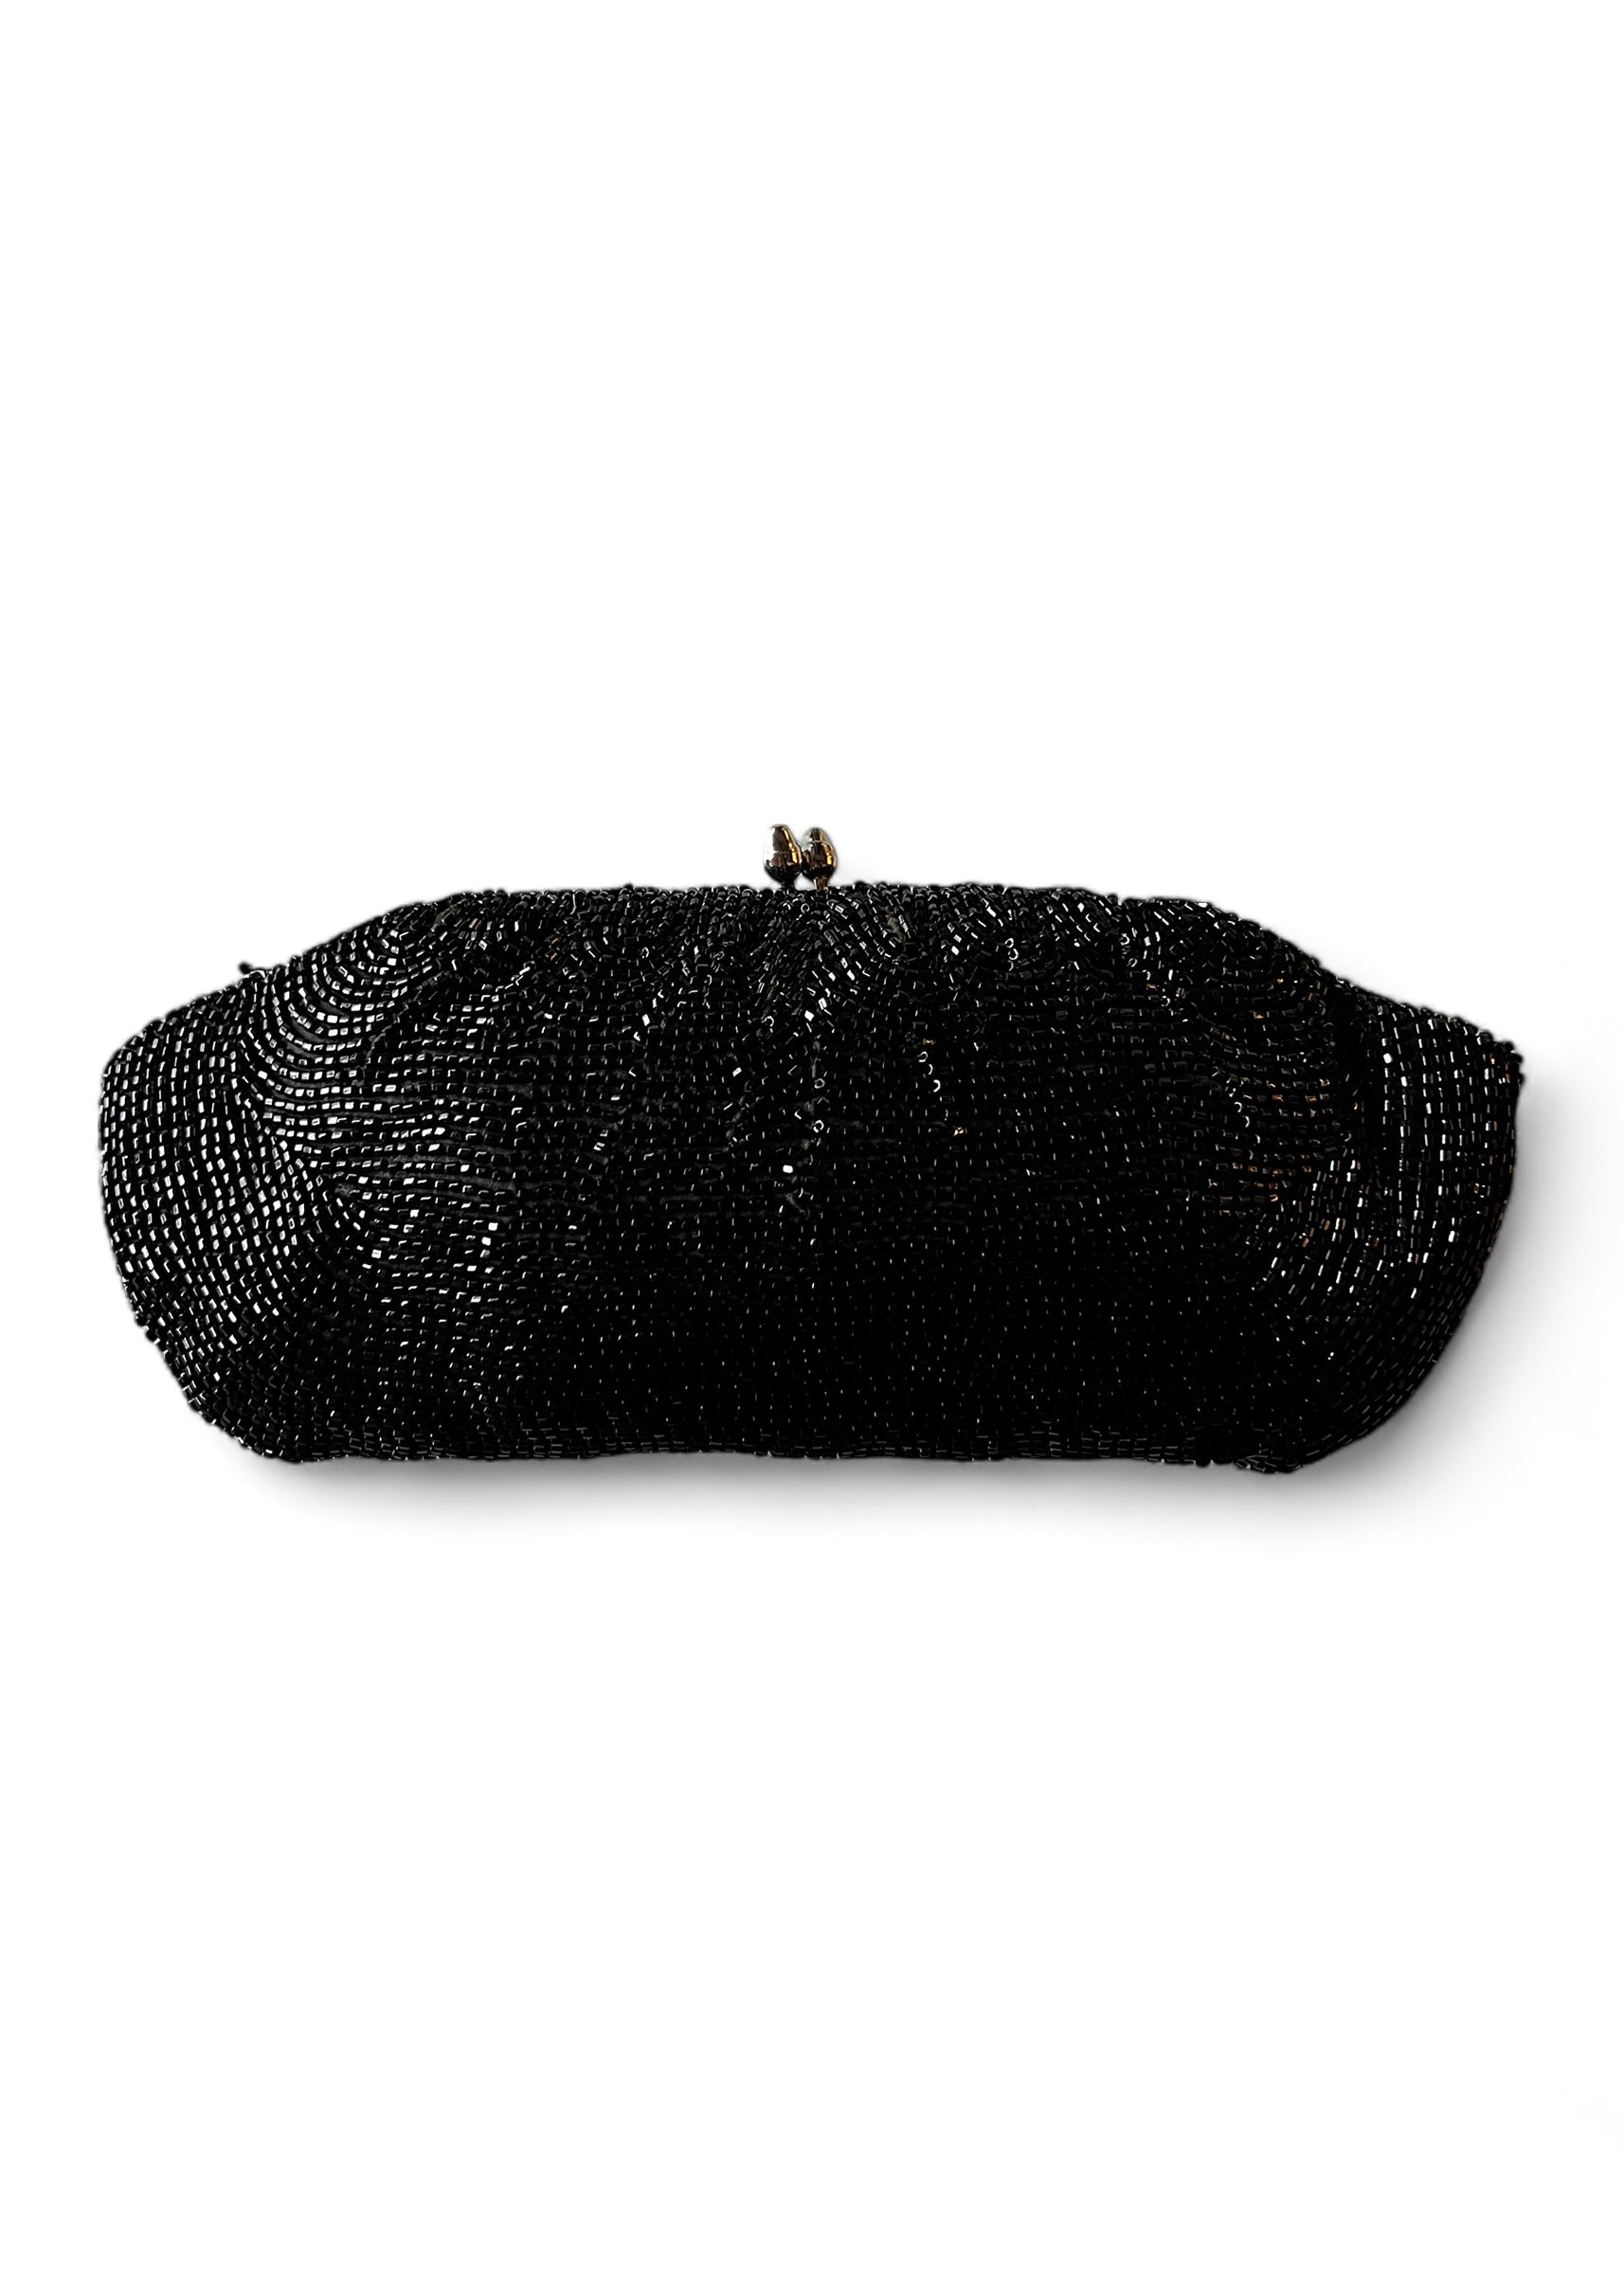 Beaded clutch bag (Wing): Antique